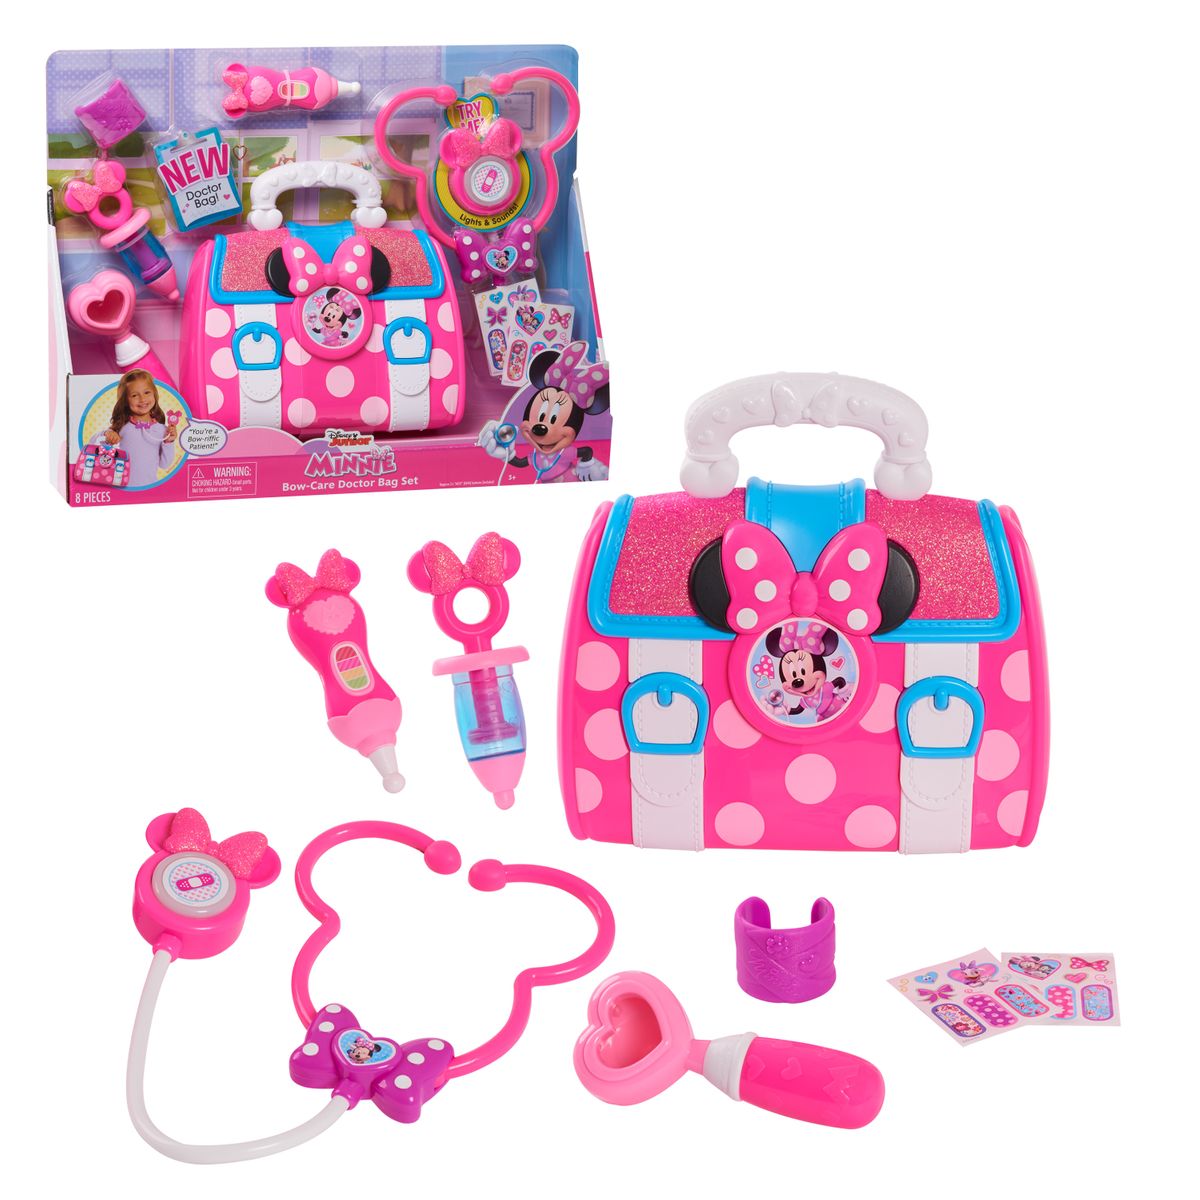 RDY 送料無料 Just Play Disney Junior 039 s Minnie Mouse Bow-Care Doctor Bag Set Includes Lights and Sounds Stethoscope, Kids Toy for Ages 3 up 楽天海外通販 Just Play Disney Junior’s Minnie Mouse Bow-Care Doctor Bag Set Includes a Lights a